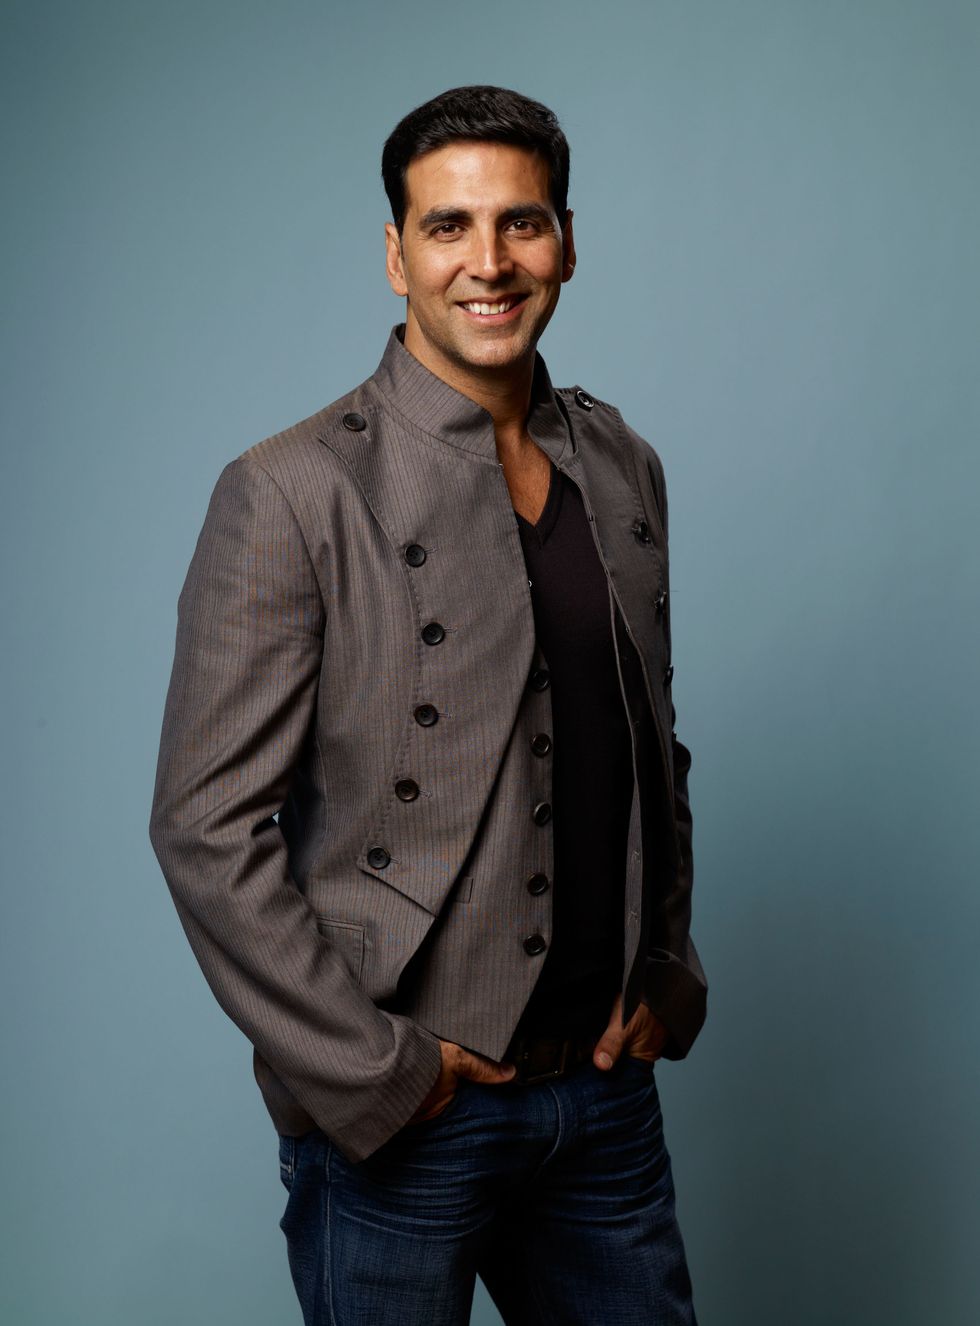 toronto, on   september 10  executive producer akshay kumar of breakaway poses for a portrait during the 2011 toronto film festival at the guess portrait studio on september 10, 2011 in toronto, canada  photo by matt carrgetty images